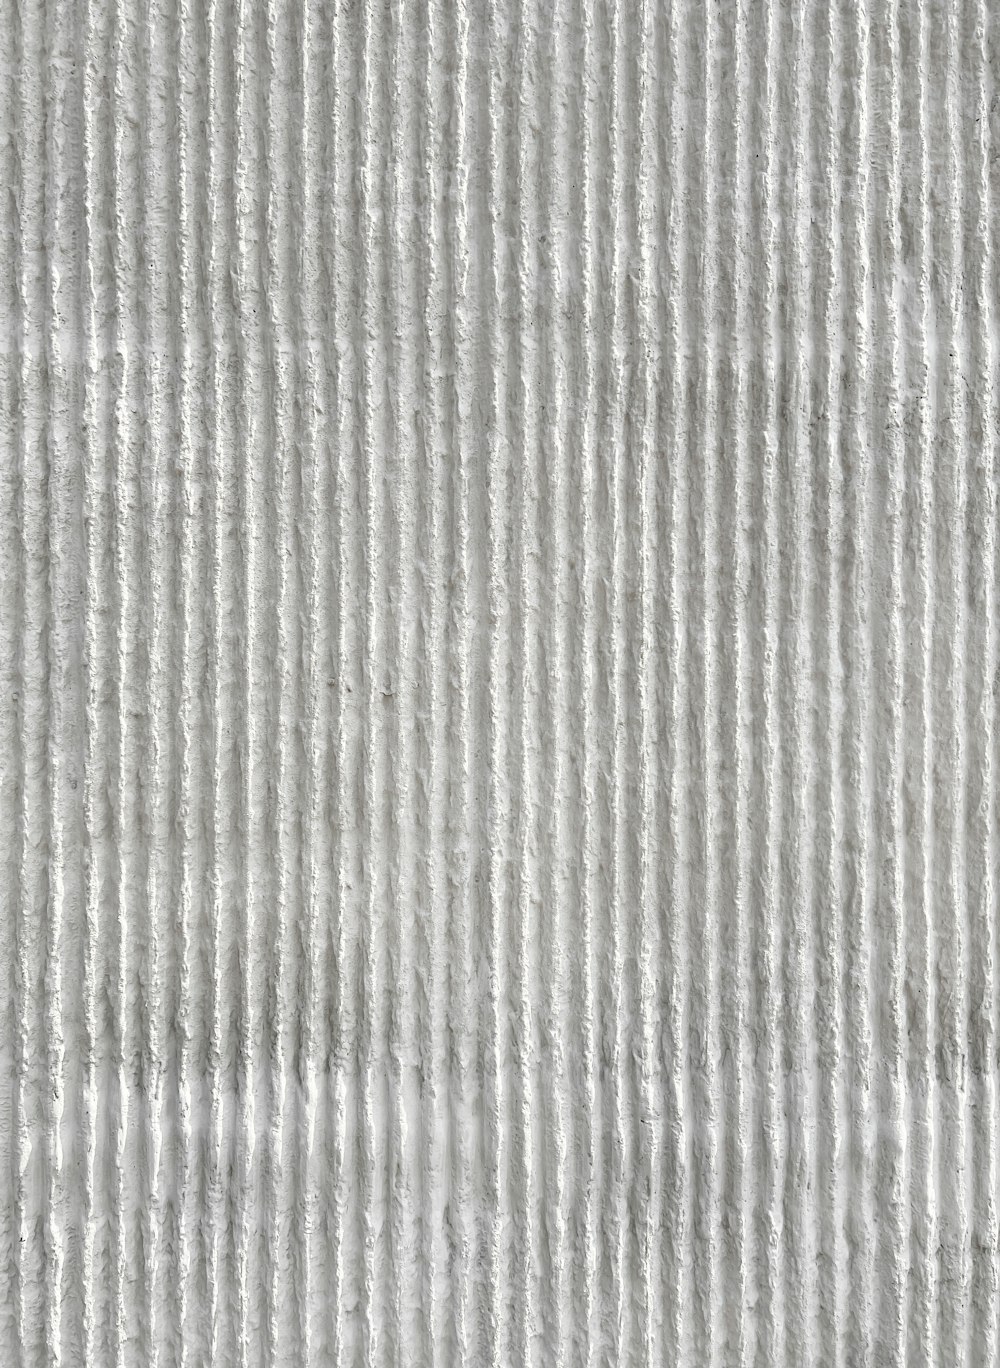 a close up of a white textured wallpaper